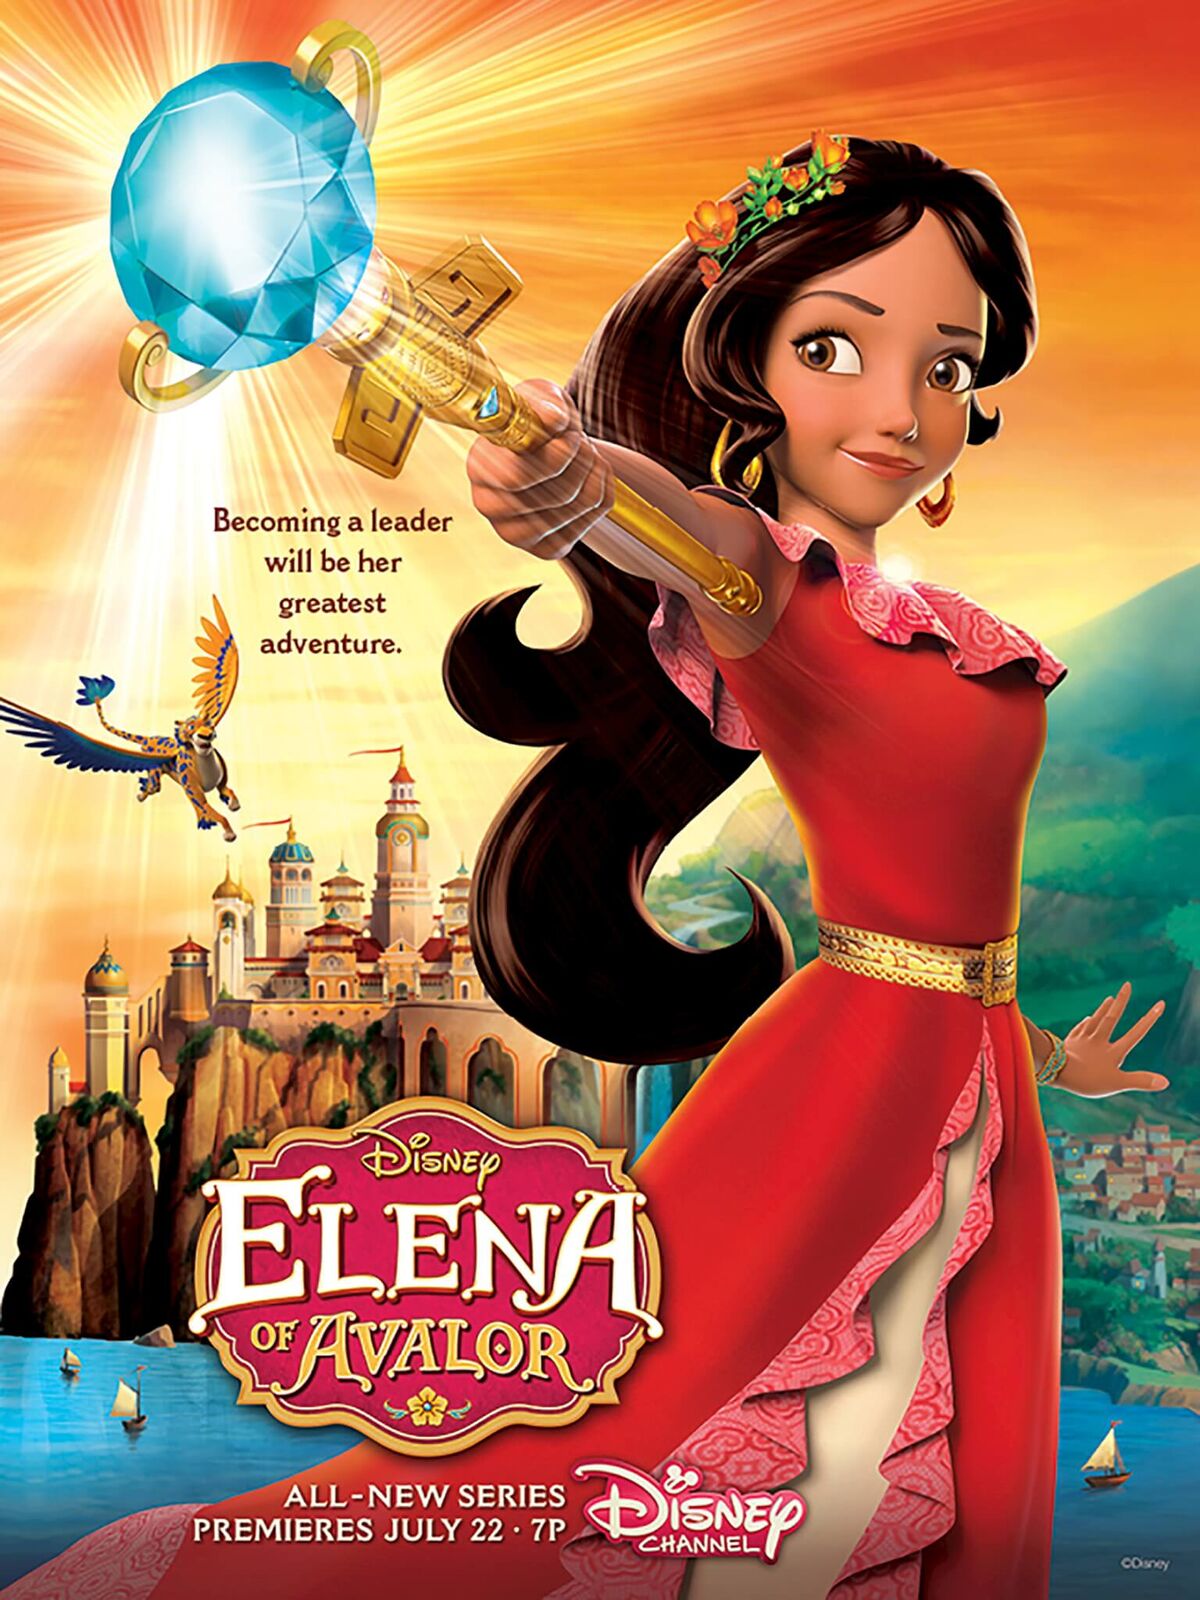 Sofia the First' Delivers the Spin-off 'Elena of Avalor' | Fandom